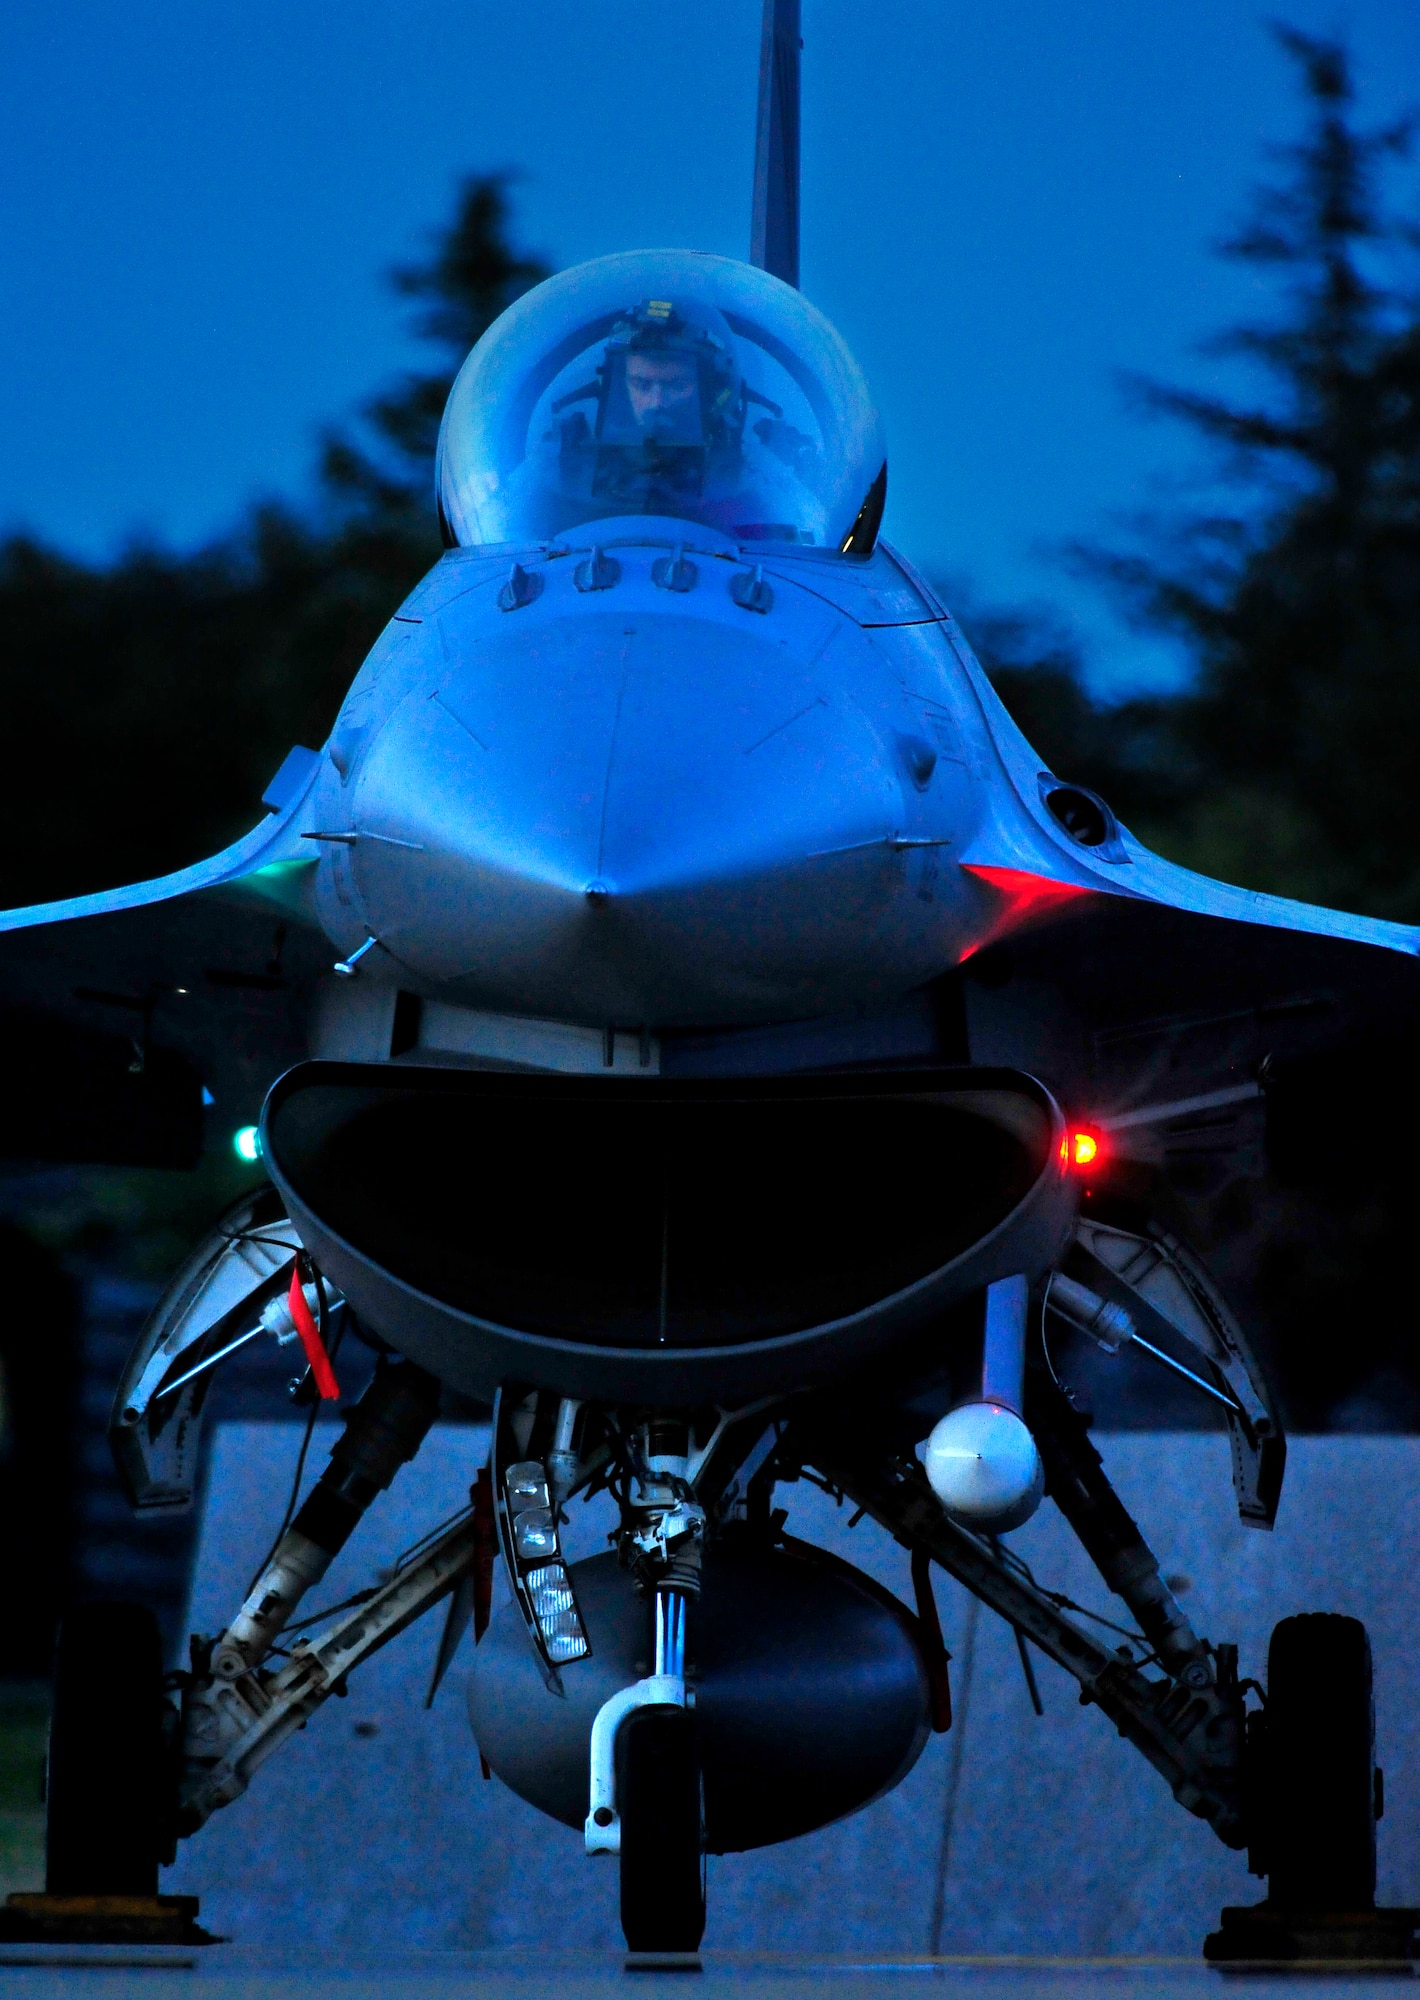 U.S. Air Force Capt. Christopher Charron, 14th Fighter Squadron, prepares for a night flight from Misawa Air Base, Japan, Sept. 9, 2013. Pilots from the 35th Fighter Wing totaled more than 300 flying hours during Iron Spear 13-2, an exercise that tested the F-16’s abilities against the Japan Ground Self-Defense Force’s surface-to-air missile sites. (U.S. Air Force photo by Staff Sgt. Nathan Lipscomb)